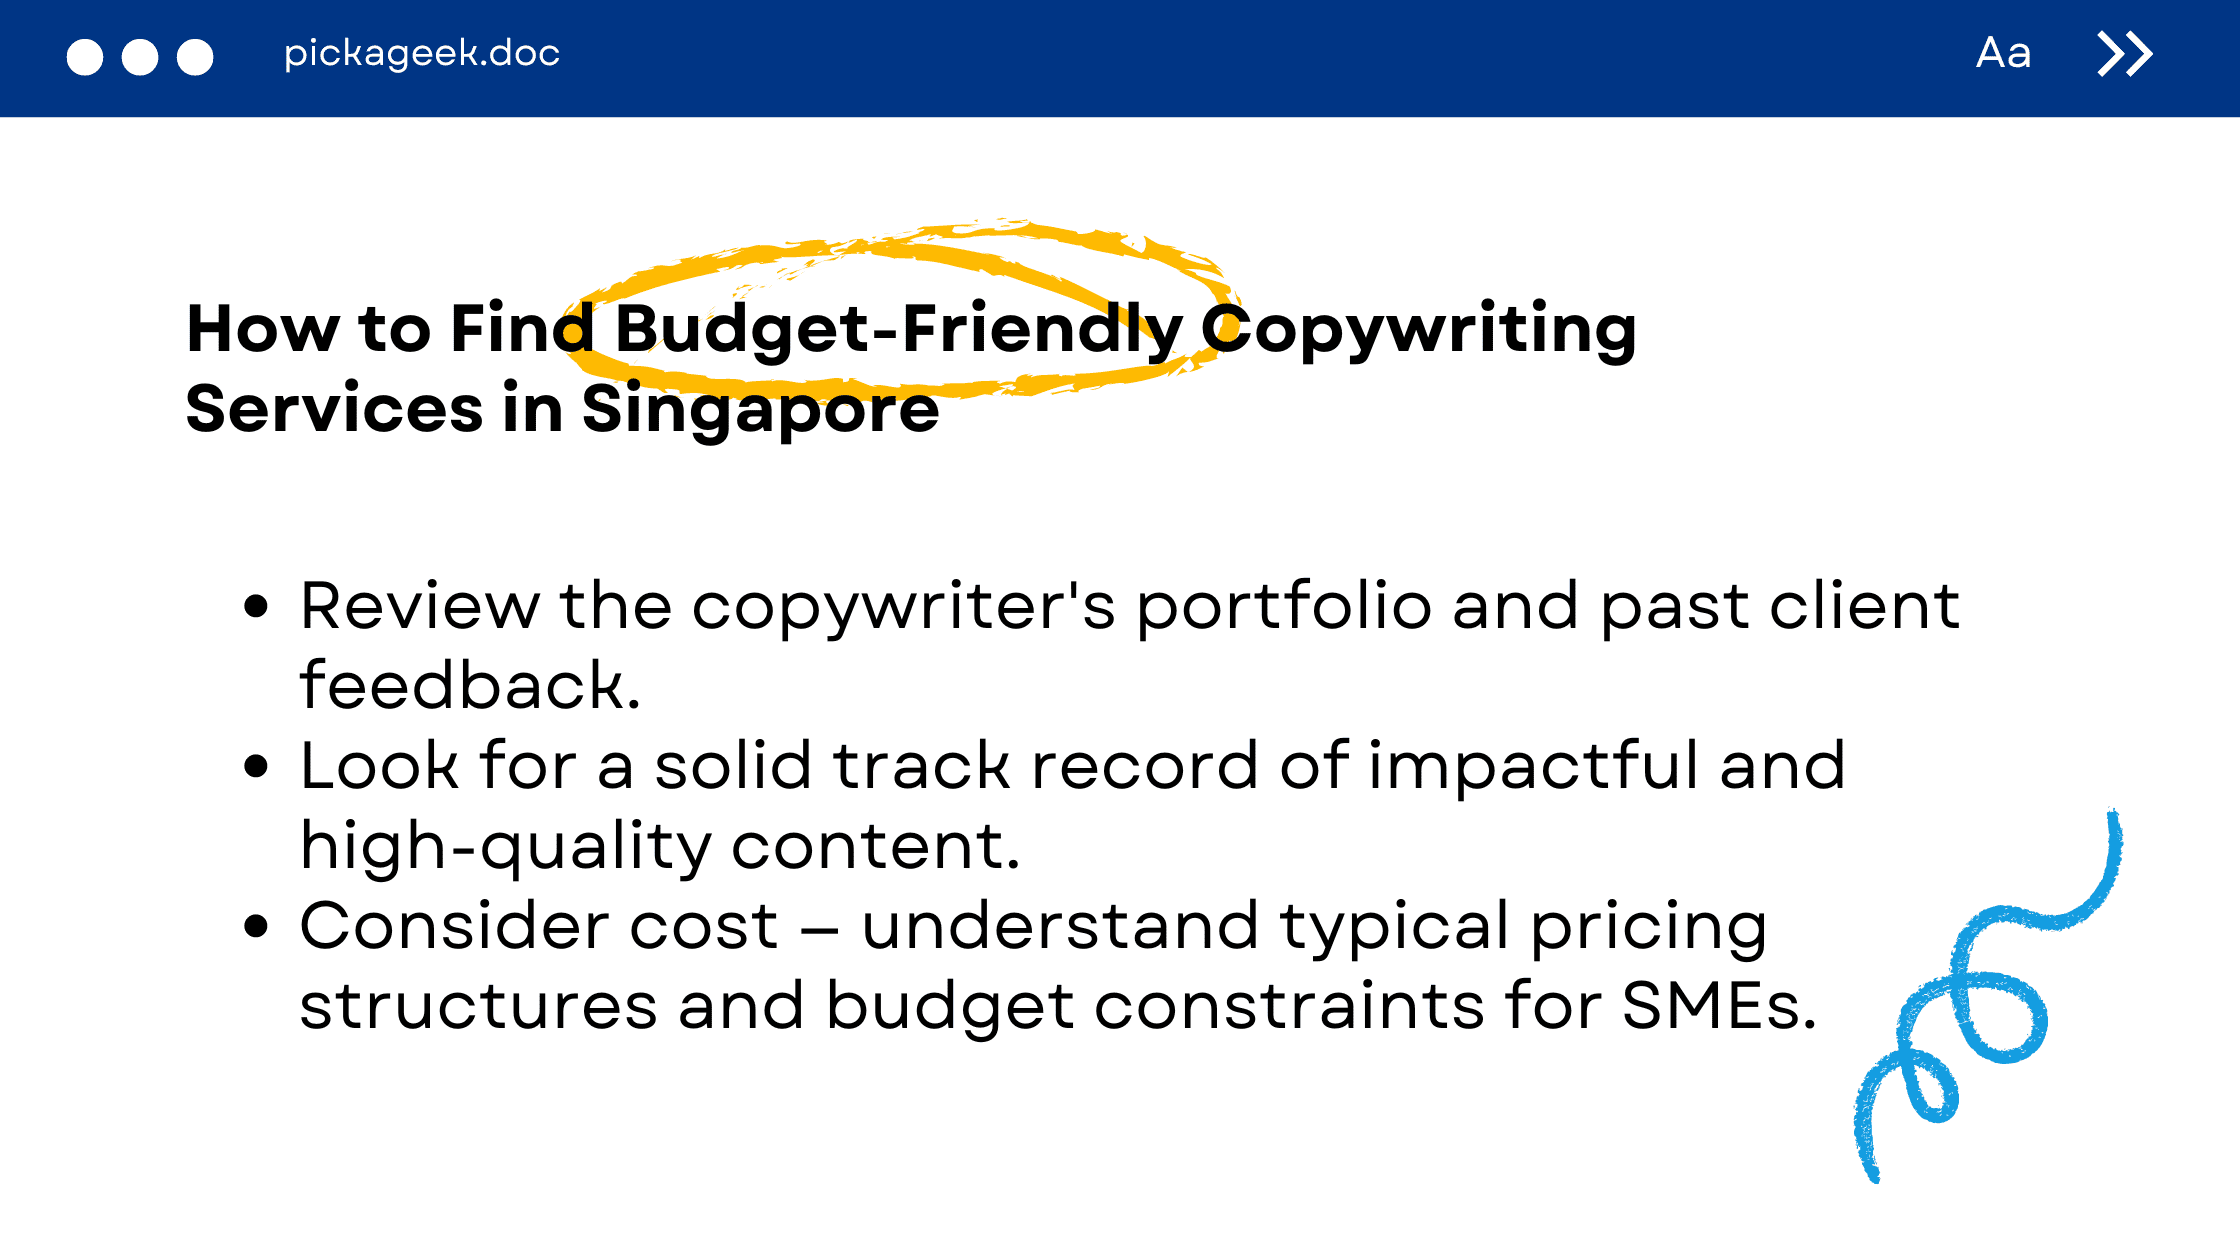 How To Find Copywriting Services in Singapore on a Budget?